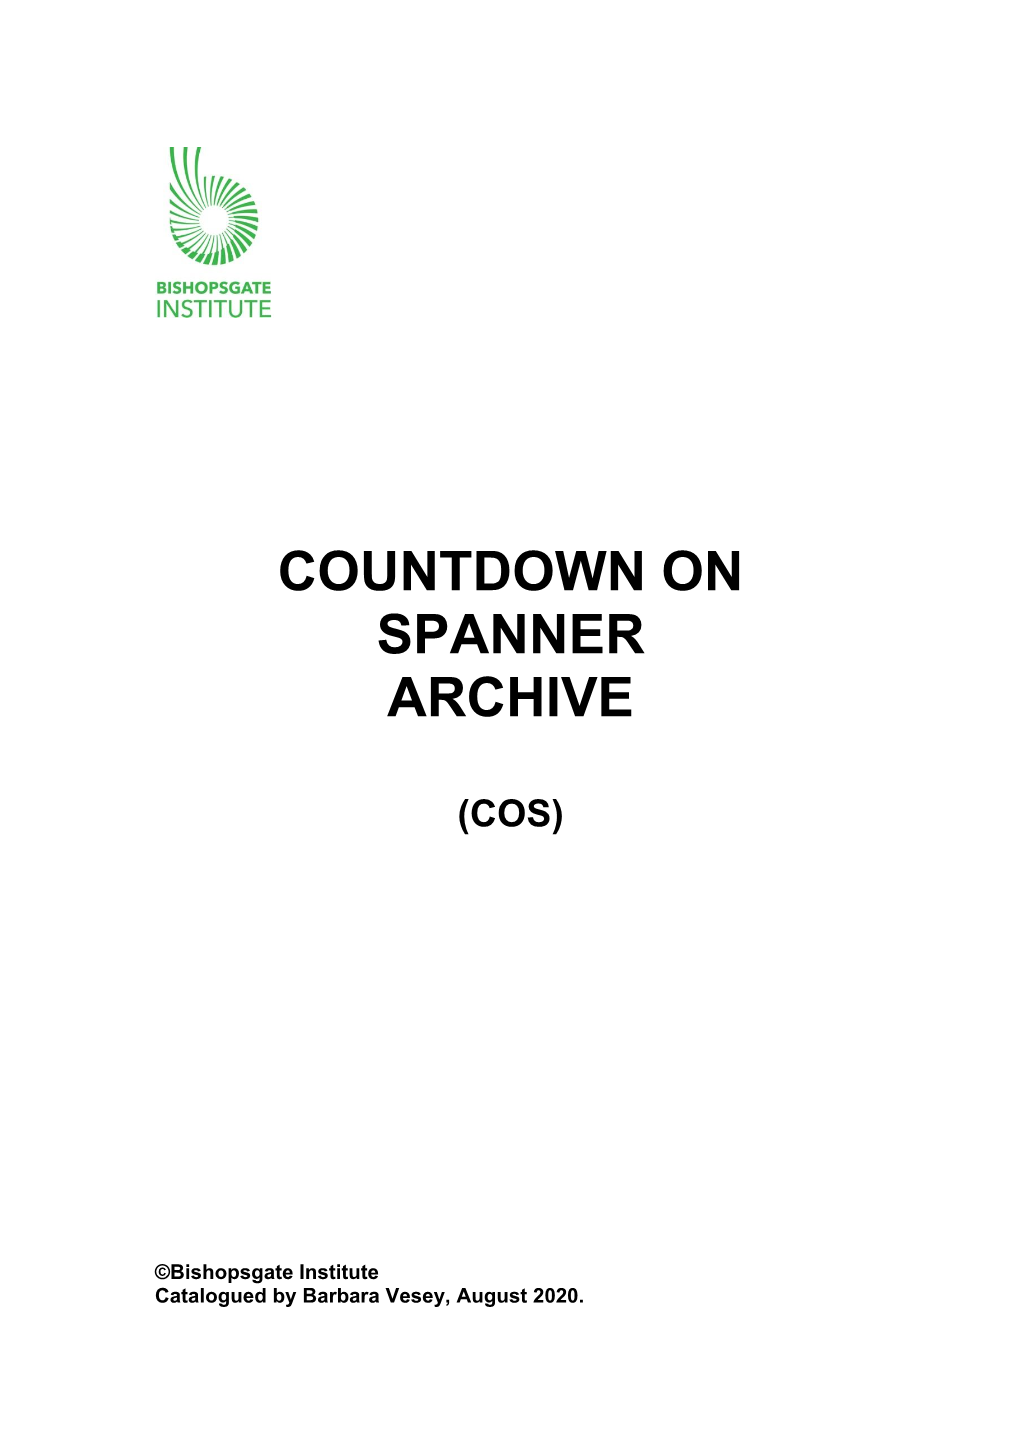 Countdown on Spanner Archive